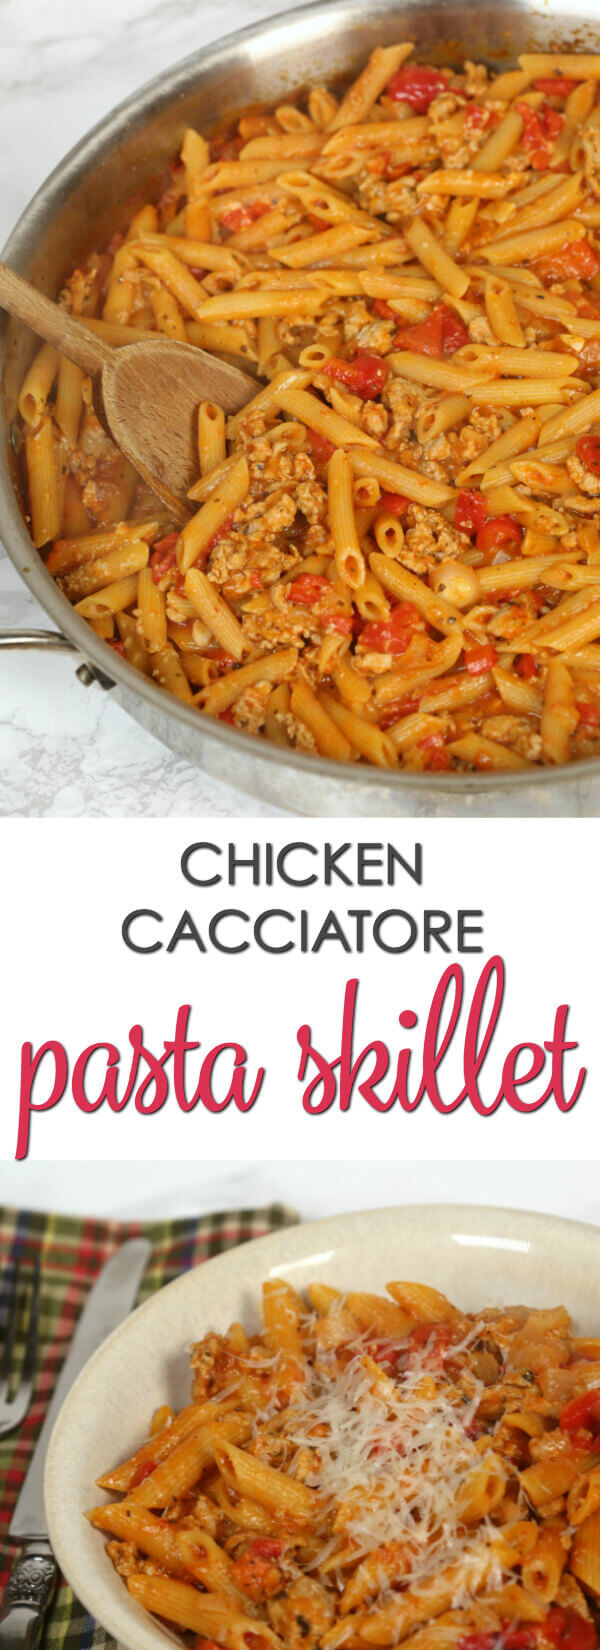 Chicken Cacciatore Pasta Skillet - this easy one pot meal is ready in less than 30 minutes